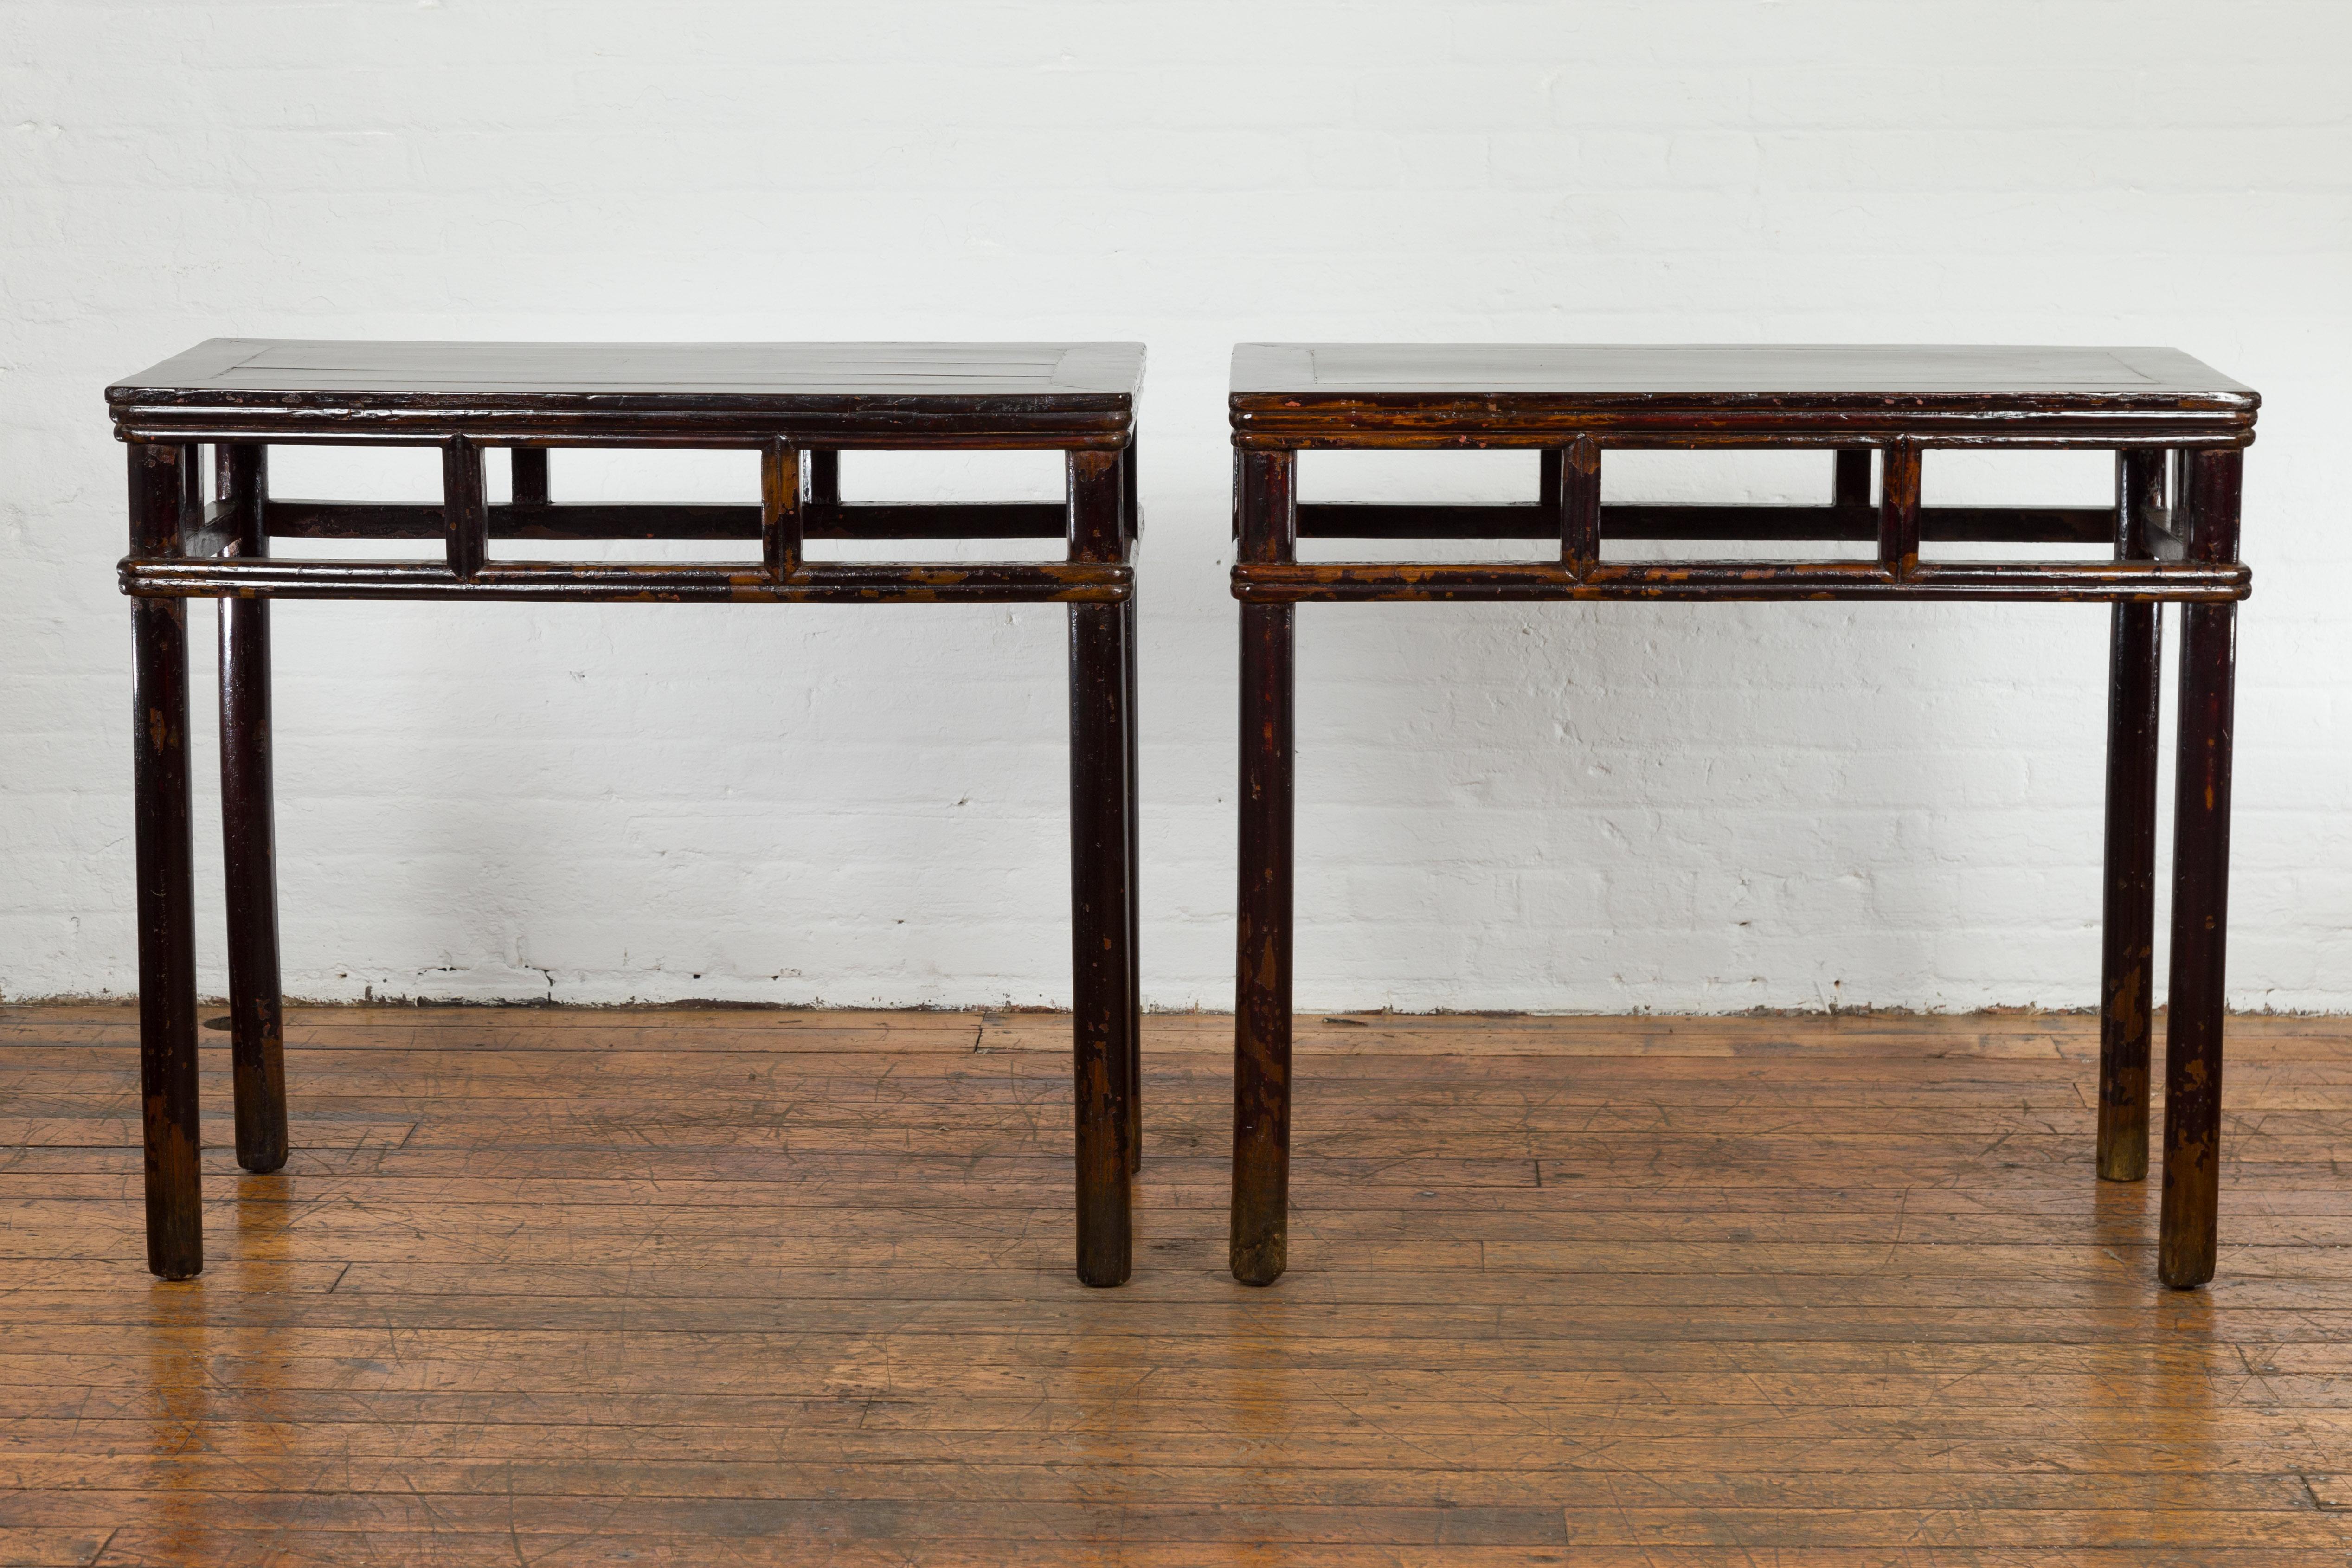 A pair of Chinese late Qing Dynasty period wine console tables from circa 1900 with black/brown lacquer, open apron, pillar strut motifs and distressed patina. Presenting an exquisite pair of Chinese wine console tables from the late Qing Dynasty